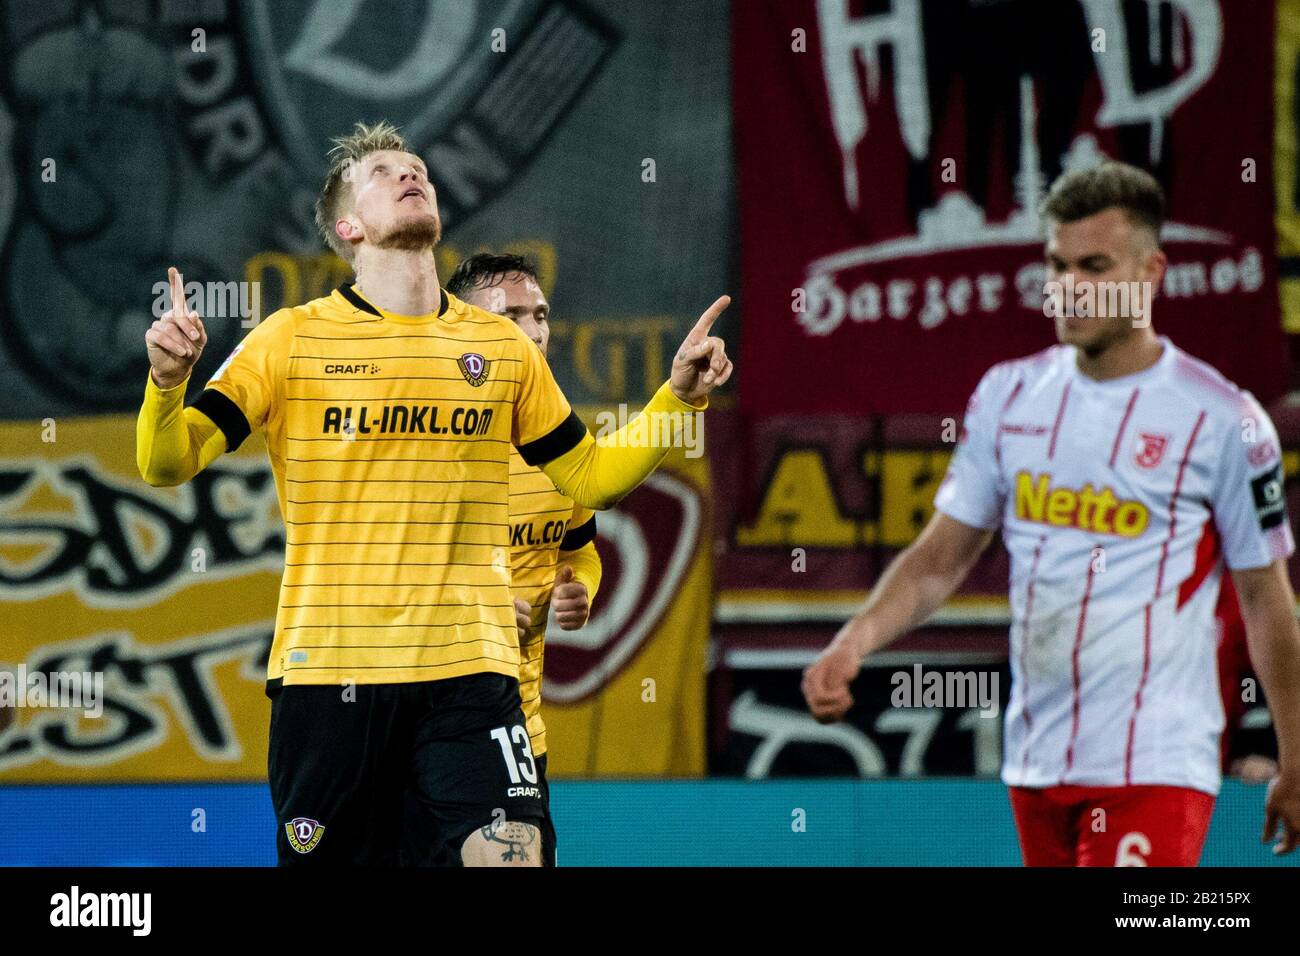 28 February 2020, Bavaria, Regensburg: Football: 2nd Bundesliga, Jahn Regensburg - Dynamo Dresden, 24th matchday in the Continental Arena. Simon Makienok Christoffersen from Dynamo Dresden (l) cheers for his goal to make it 1-2. On the right is Benedikt Saller from Regensburg. Photo: Matthias Balk/dpa - IMPORTANT NOTE: In accordance with the regulations of the DFL Deutsche Fußball Liga and the DFB Deutscher Fußball-Bund, it is prohibited to exploit or have exploited in the stadium and/or from the game taken photographs in the form of sequence images and/or video-like photo series. Stock Photo